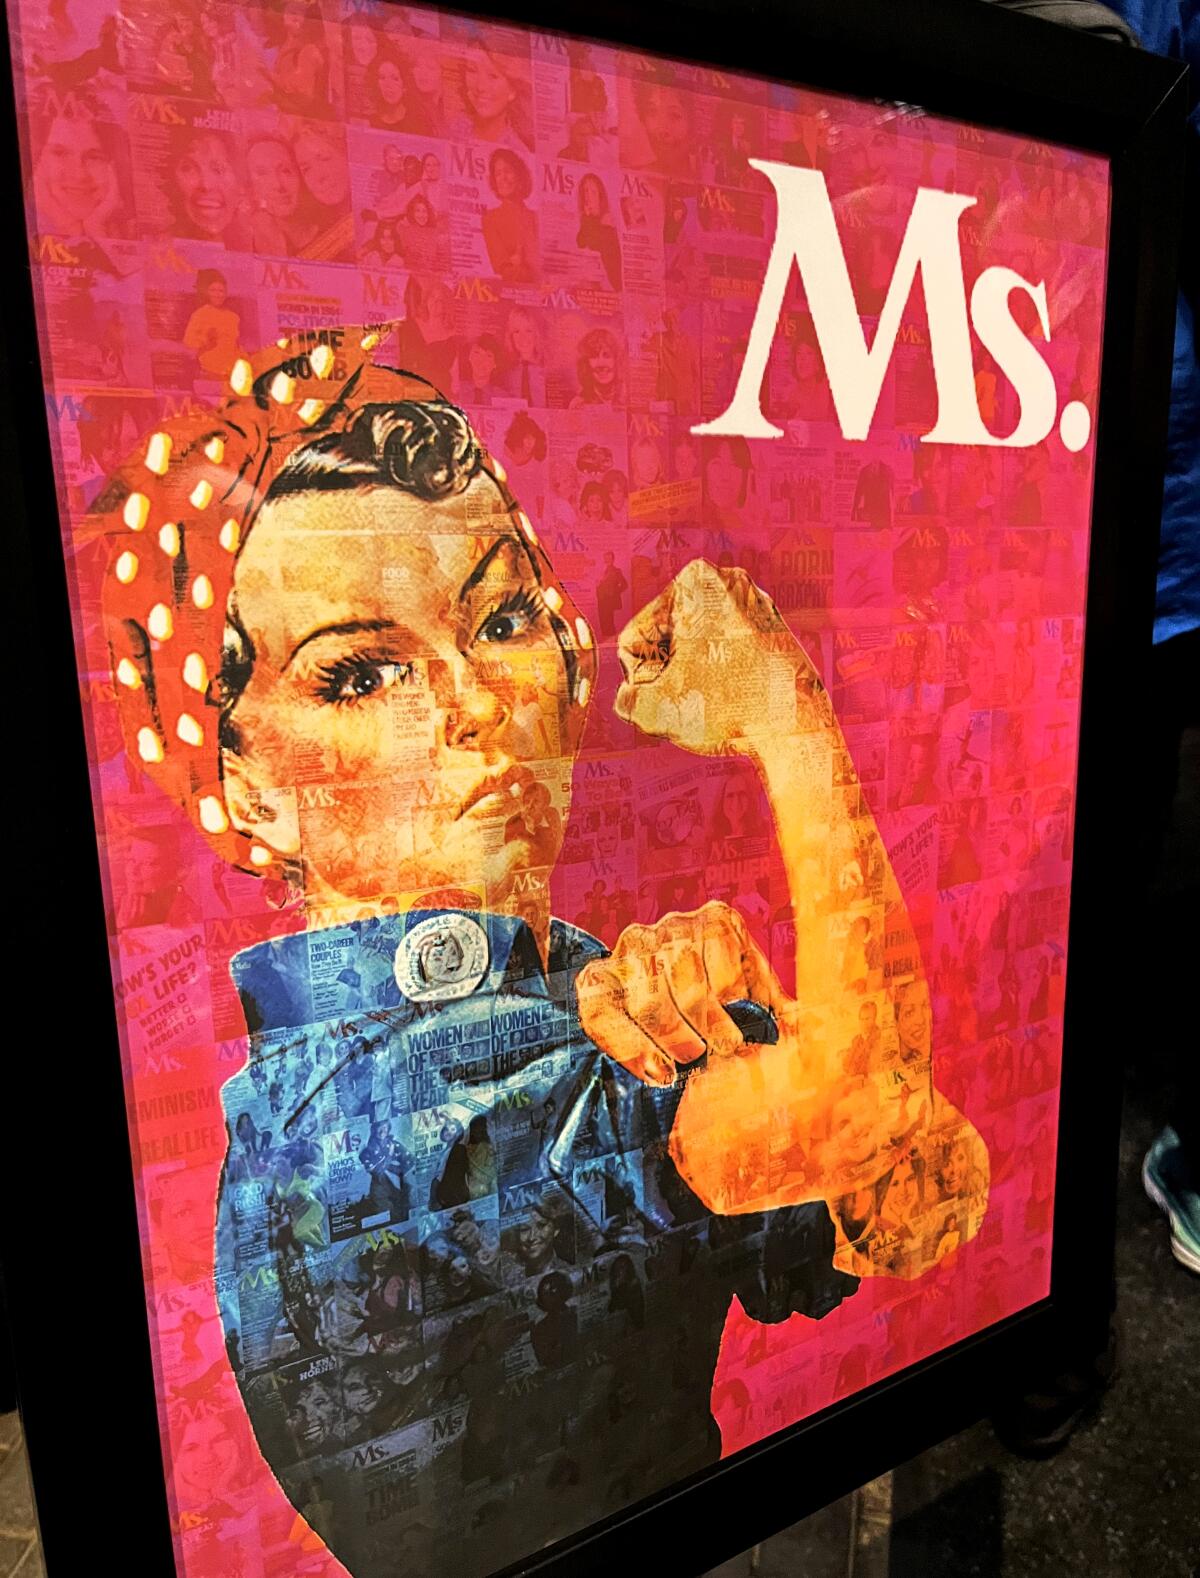 A composite image made from Ms. covers throughout the years shows Rosie the Riveter flexing her biceps.